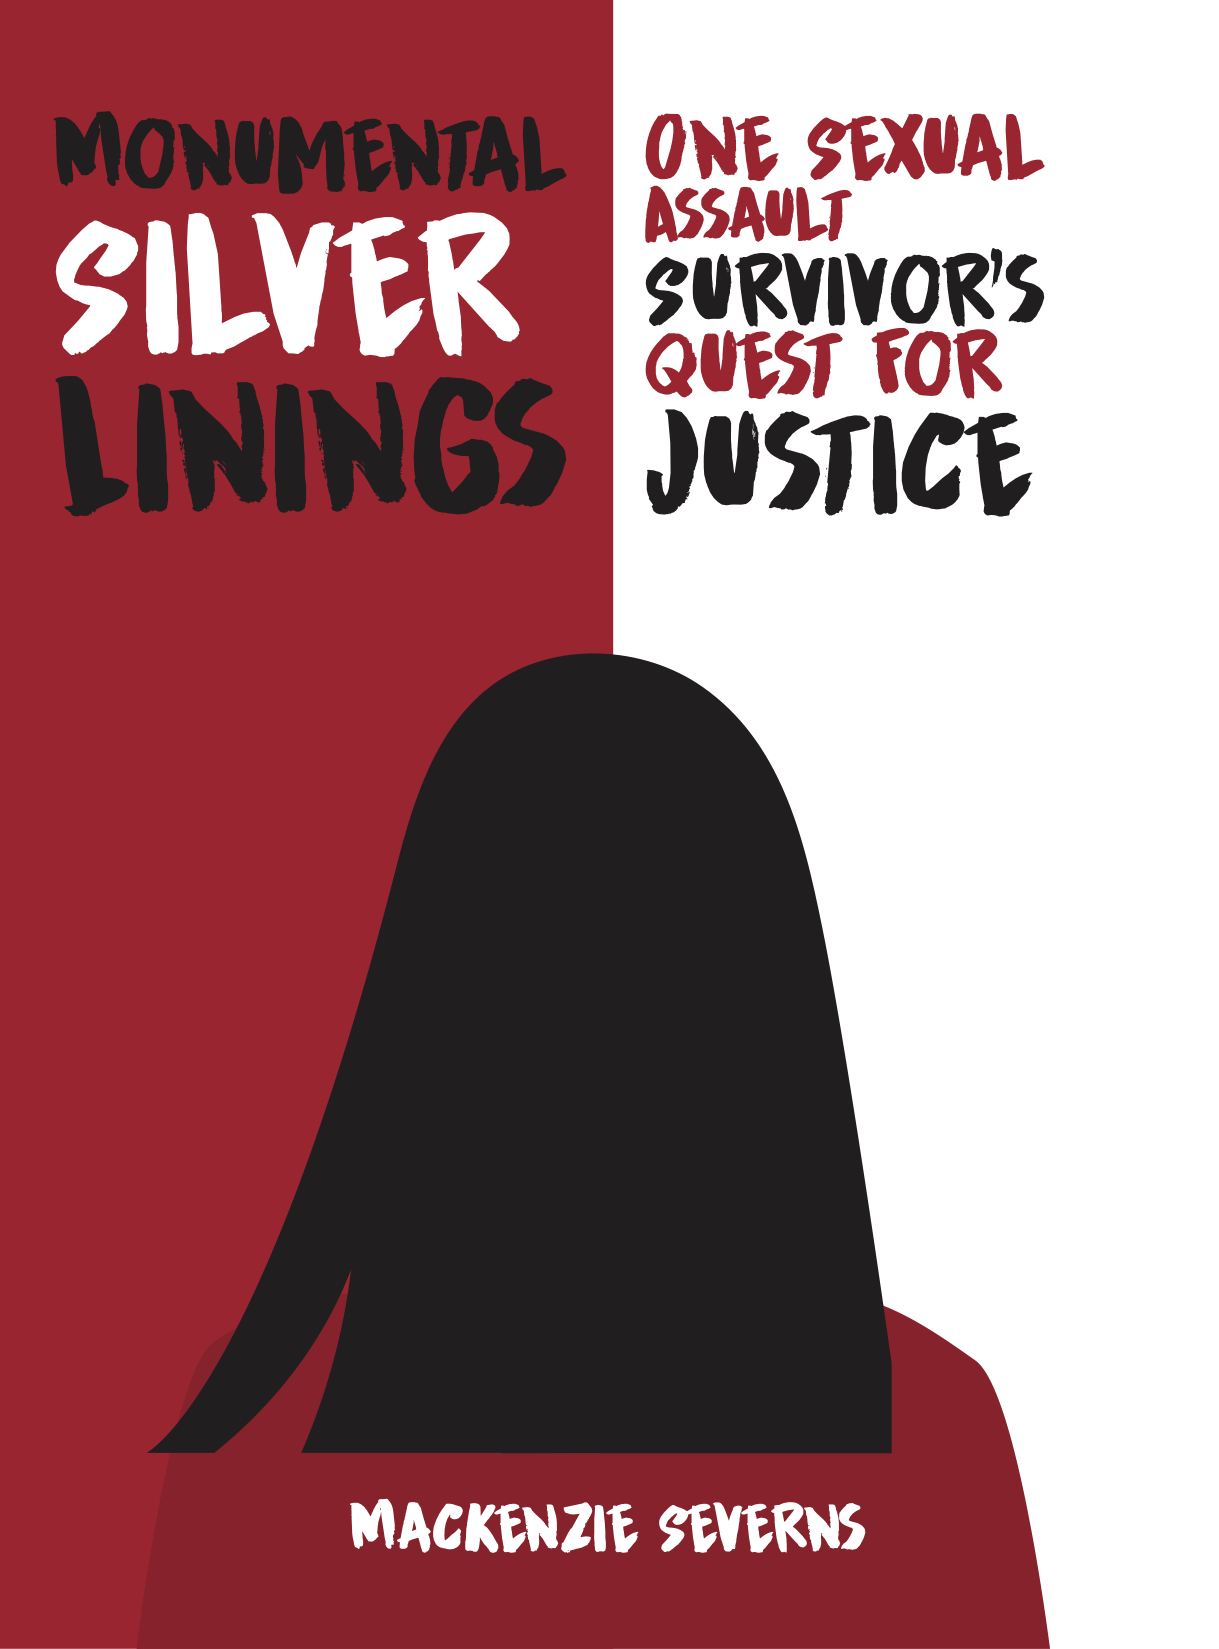 FREE: Monumental Silver Linings: One Sexual Assault Survivor’s Quest for Justice by Mackenzie Severns